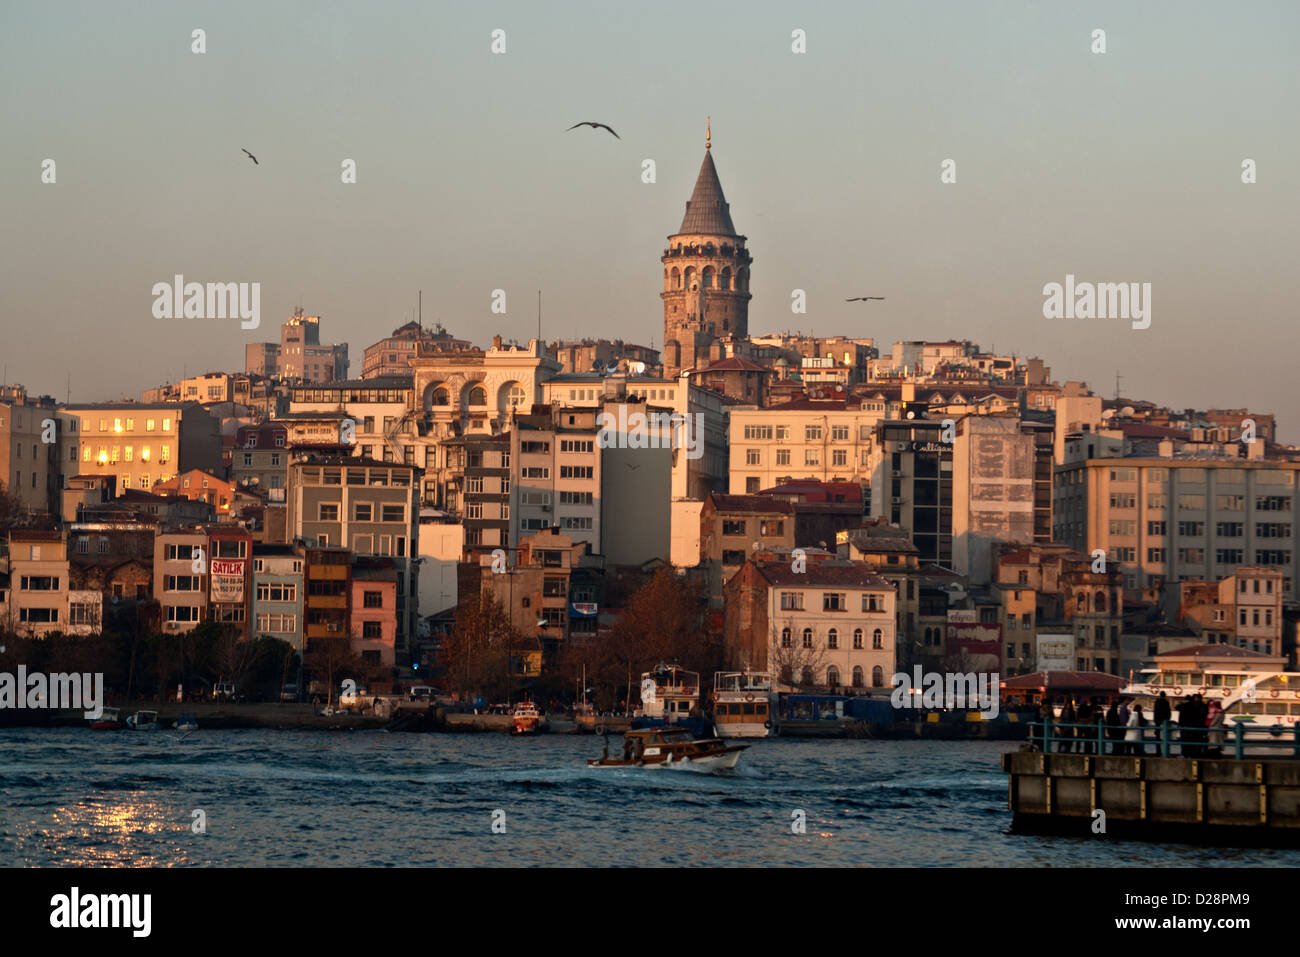 Istanbul, Galata district and Galata tower from across the Golden Horn, Turkey Stock Photo